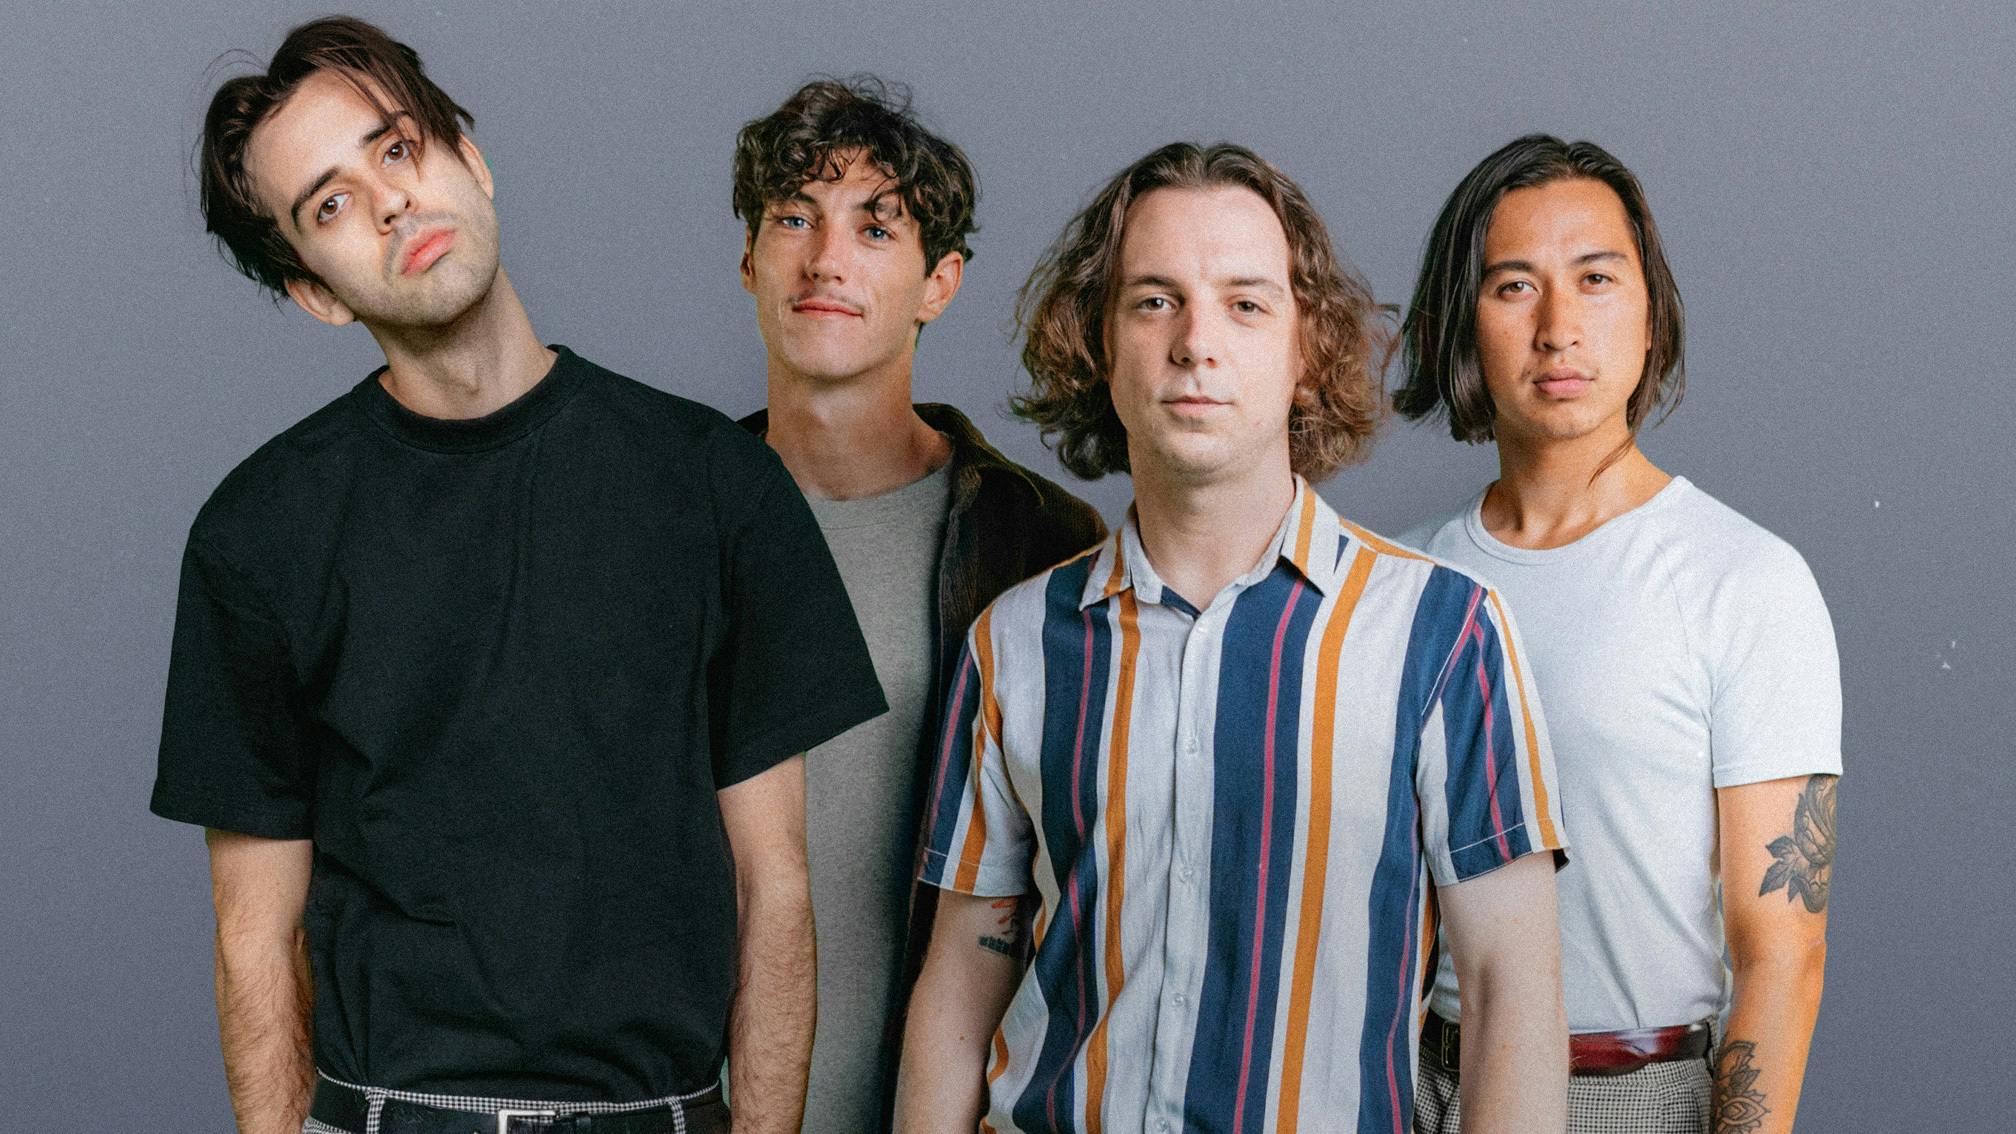 With Confidence have released their first new music in three years, Big Cat Judgement Day